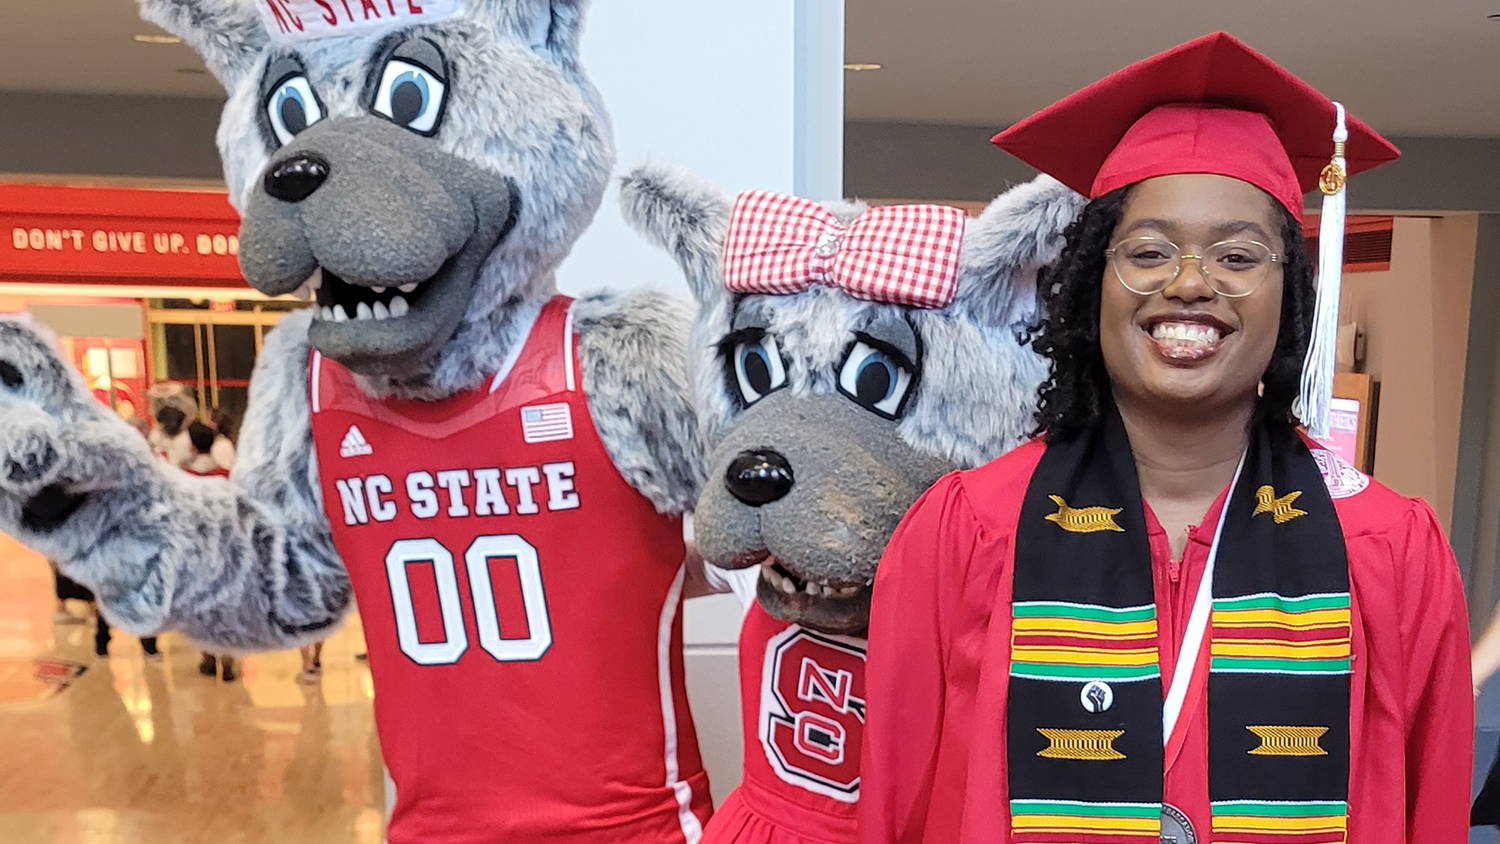 Maya Clinton smiles while wearing red graduation cap and gown. She is standing next to Mr. and Mrs. Wuf, NC State University mascots.